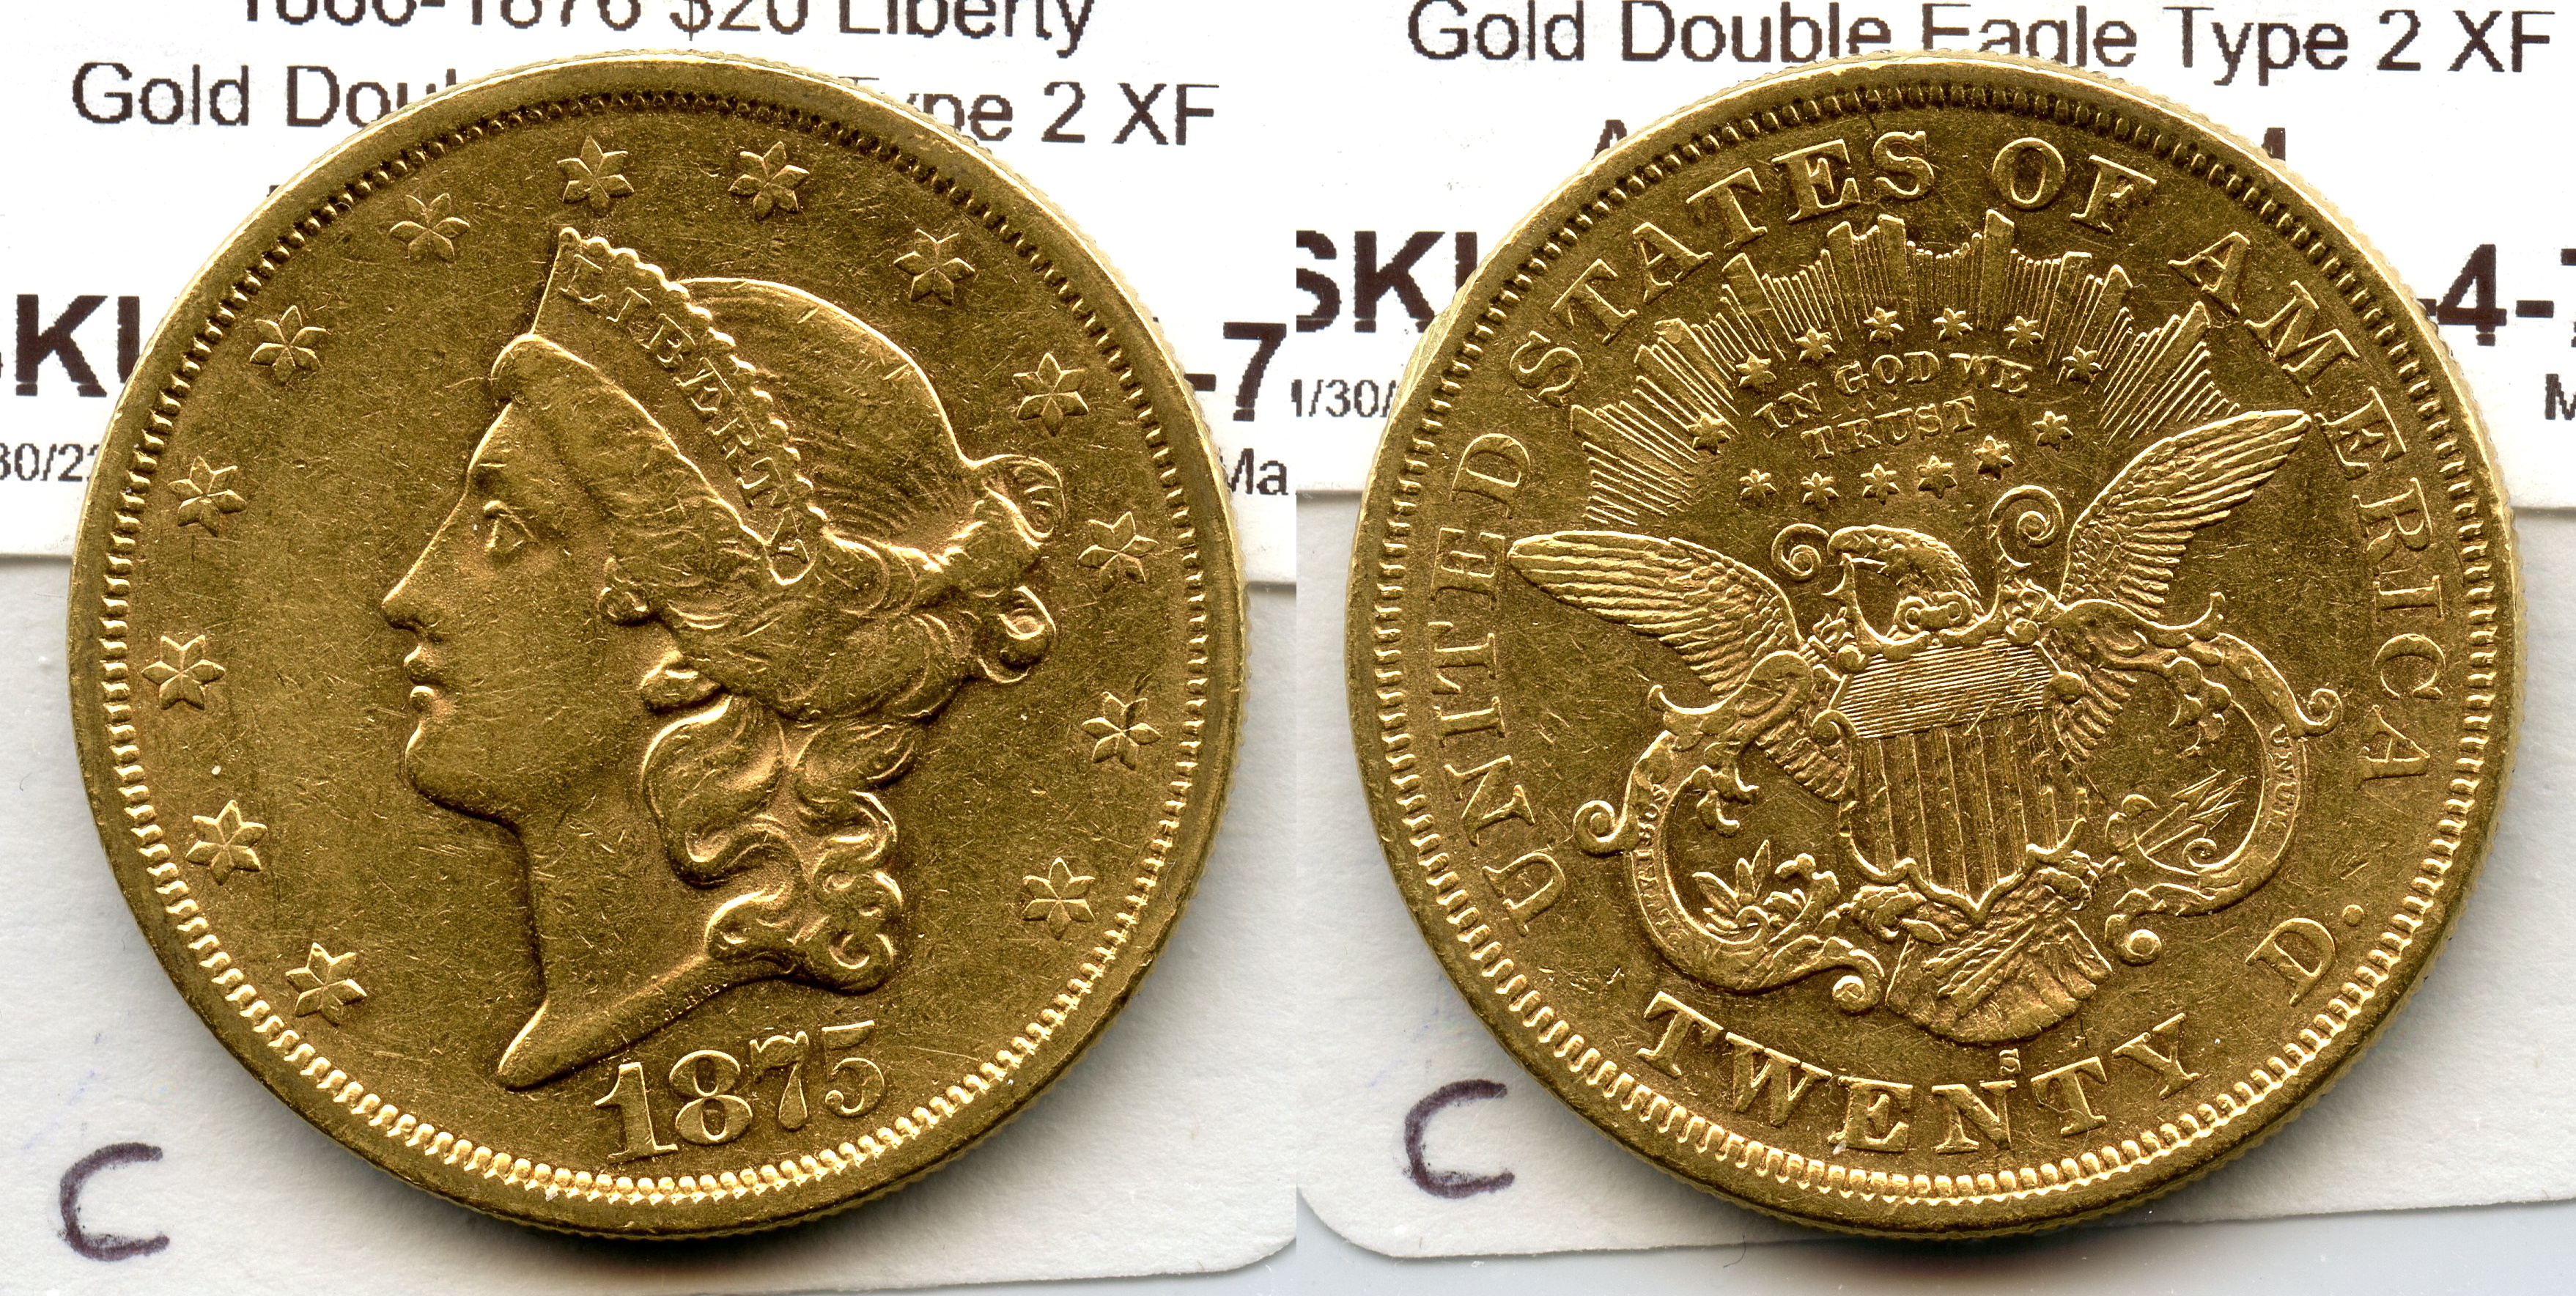 1875-S Liberty Head $20.00 Gold Double Eagle EF-40 #c large